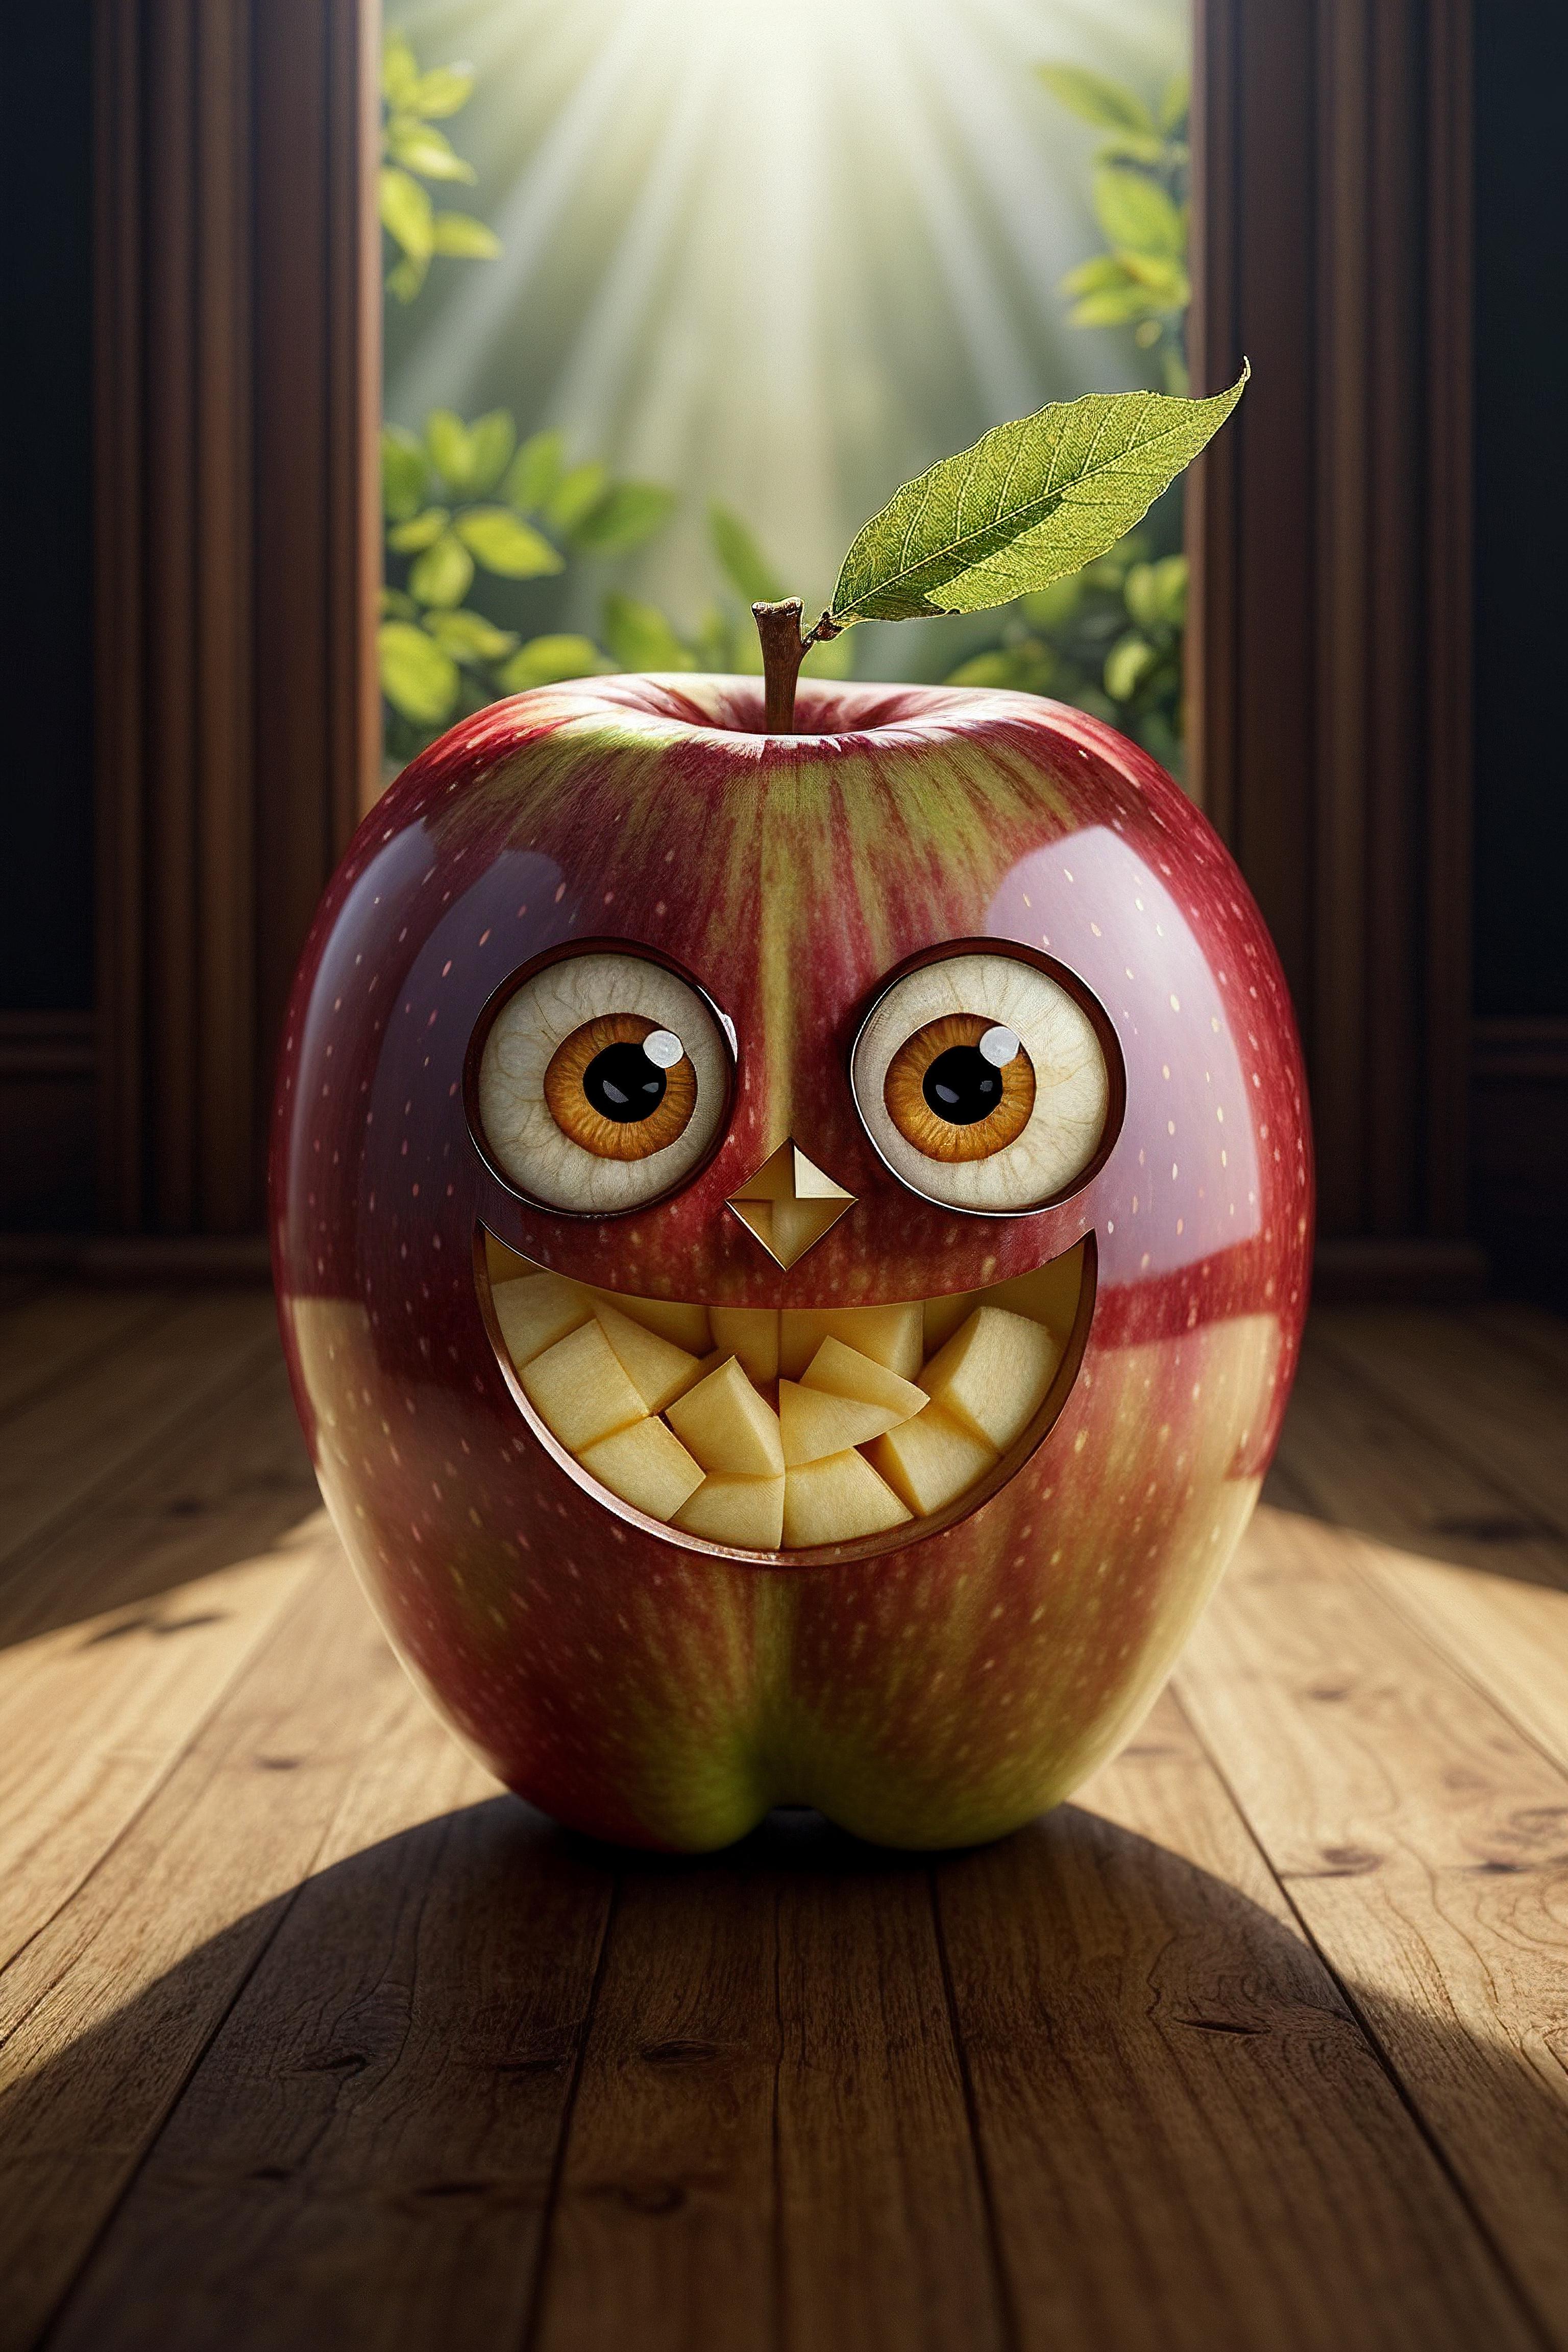 A smiling apple with owl eyes and a mouth made of cheese sits on a wooden table.